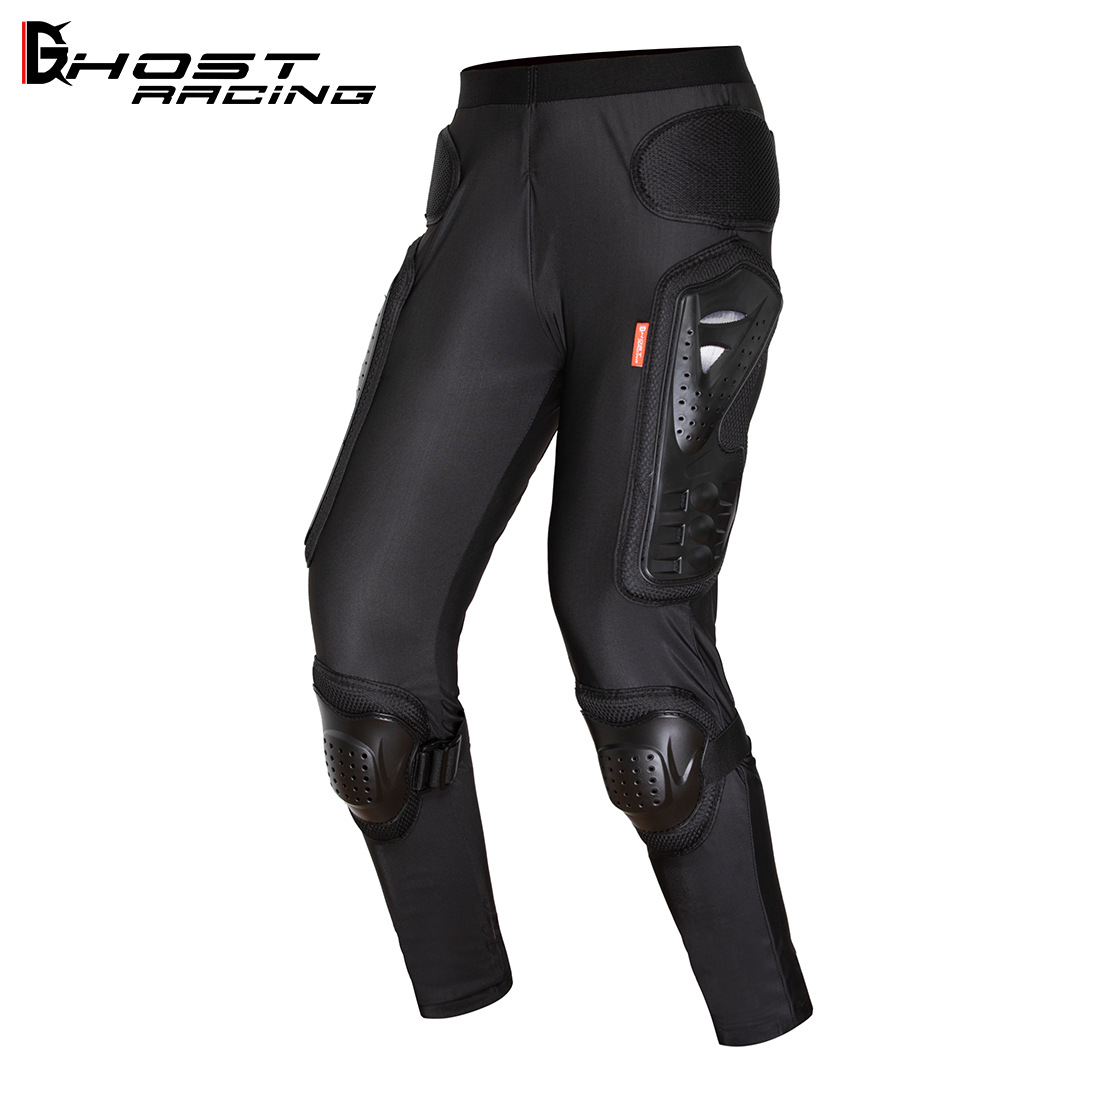 Men's Motorcycle Riding Pants Denim Jeans Protect Pads Equipment with Knee  and Hip Armor Pads VES6 (Black, XL=34) | Motorcycle riding pants, Motorcycle  jeans, Motorcycle wear men